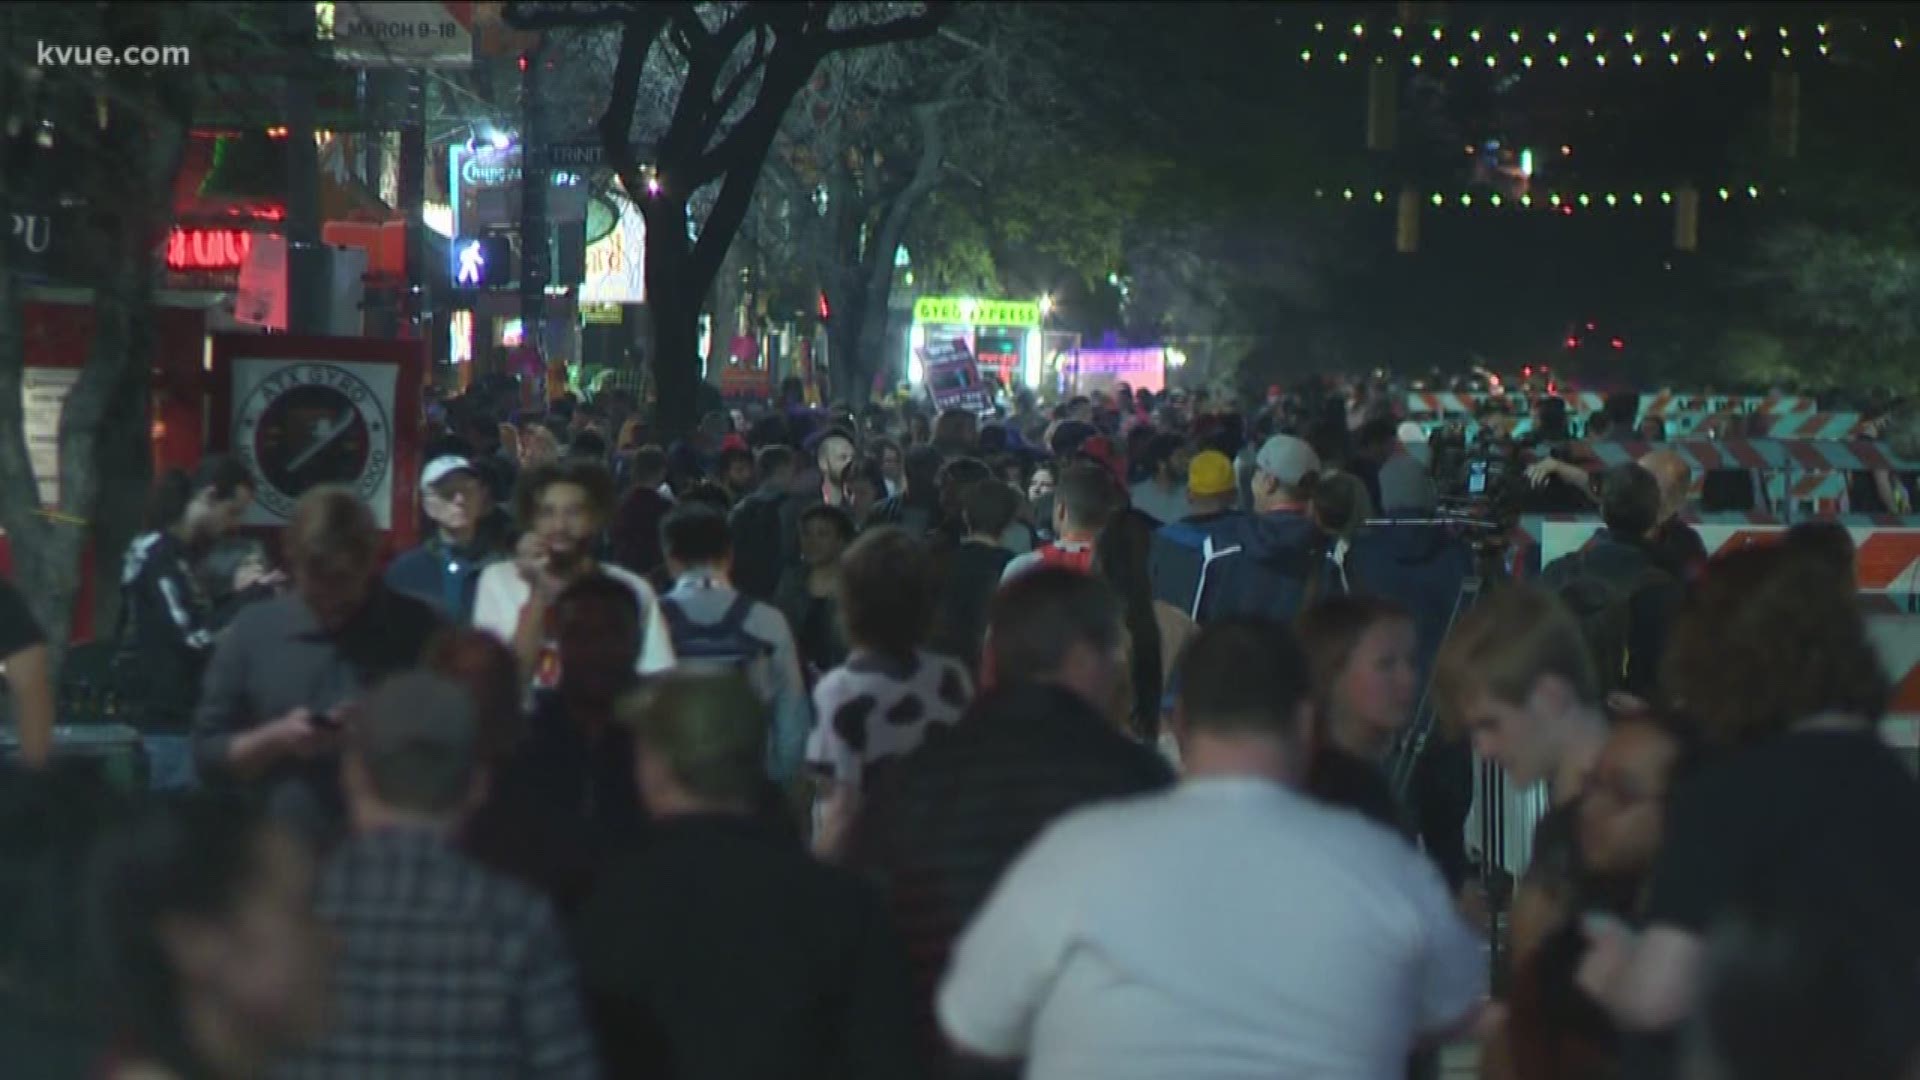 Austin police warn residents and visitors that sex traffickers take advantage of large crowds like those expected at SXSW.